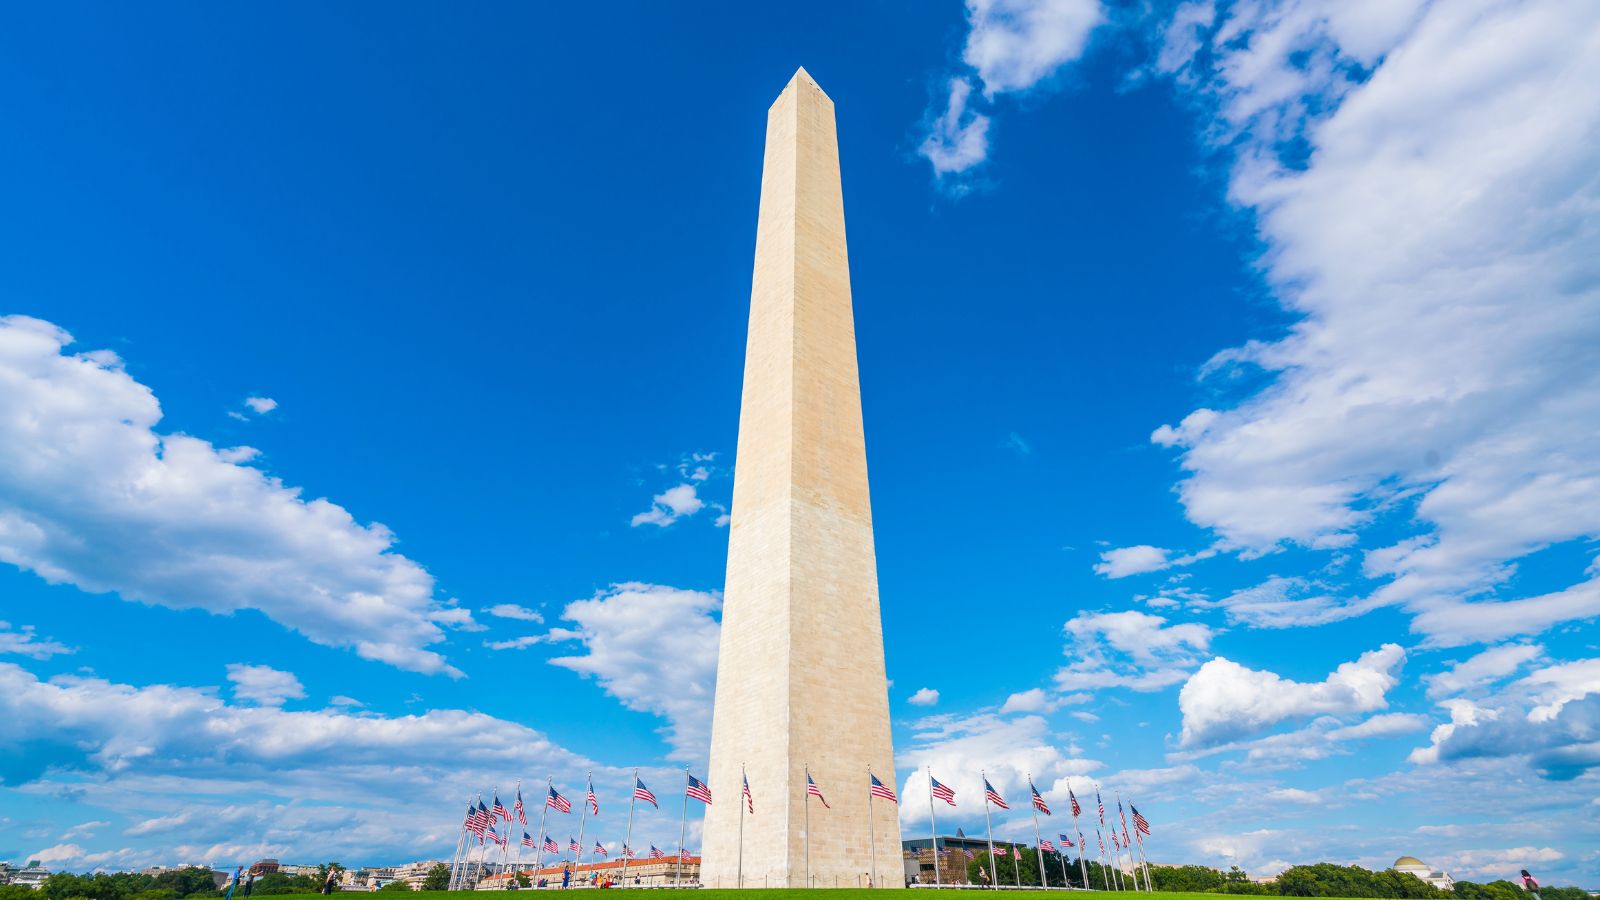 <p>Recommended by 61% of visitors</p><p>The Washington Monument, a tribute to the first US President George Washington, is the world’s tallest stone structure on the National Mall in Washington, DC. Constructed from marble, granite, and bluestone gneiss, it offers panoramic views of the city from its observation deck. Visitors can see landmarks like the US Capitol Building and the White House. Renovated in 2019, its elevator can accommodate numerous visitors, making it a must-visit for its historical significance and breathtaking views.</p>